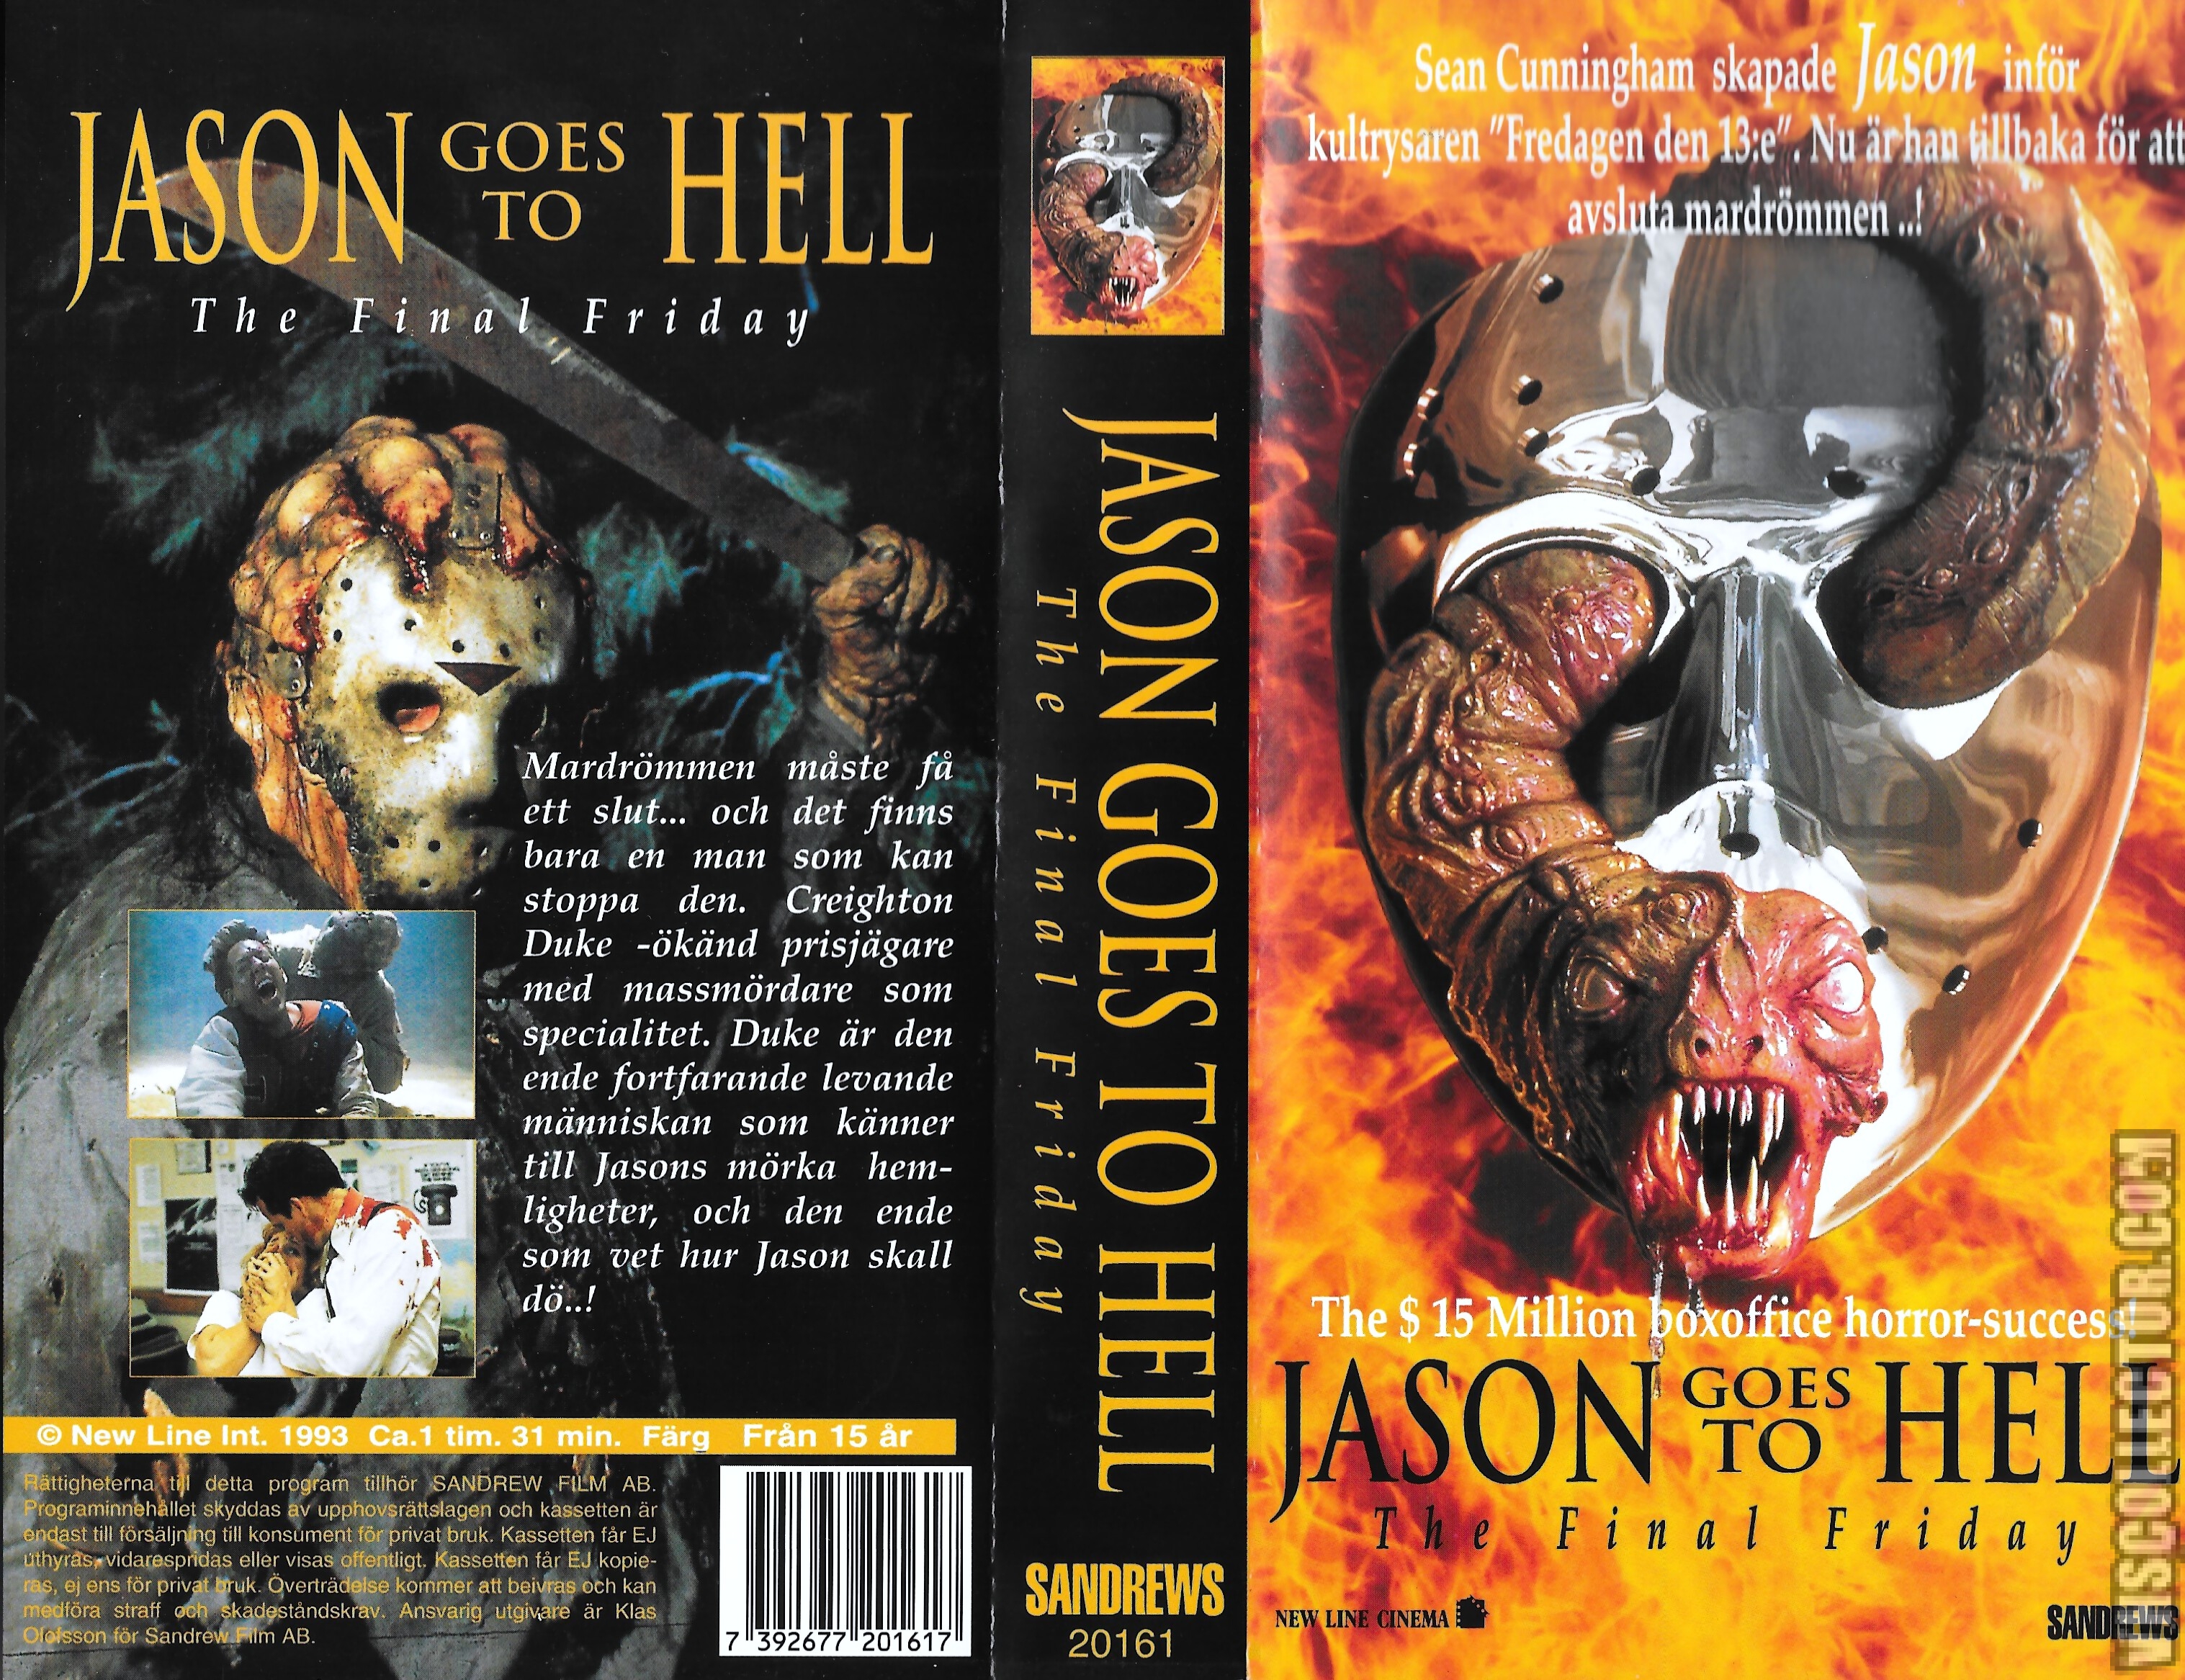 Jason Goes to Hell: The Final Friday | VHSCollector.com